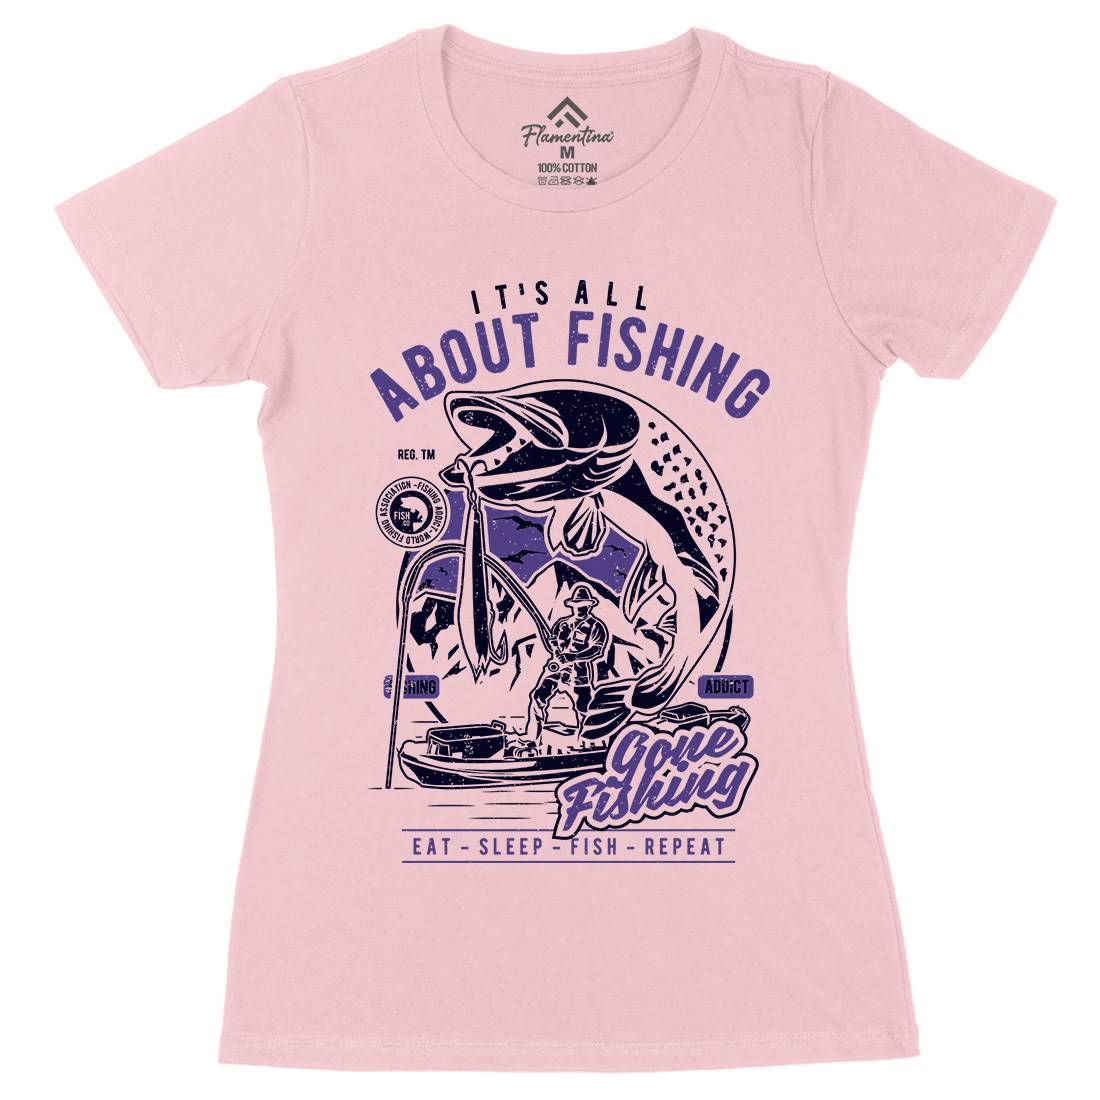 All About Womens Organic Crew Neck T-Shirt Fishing A604